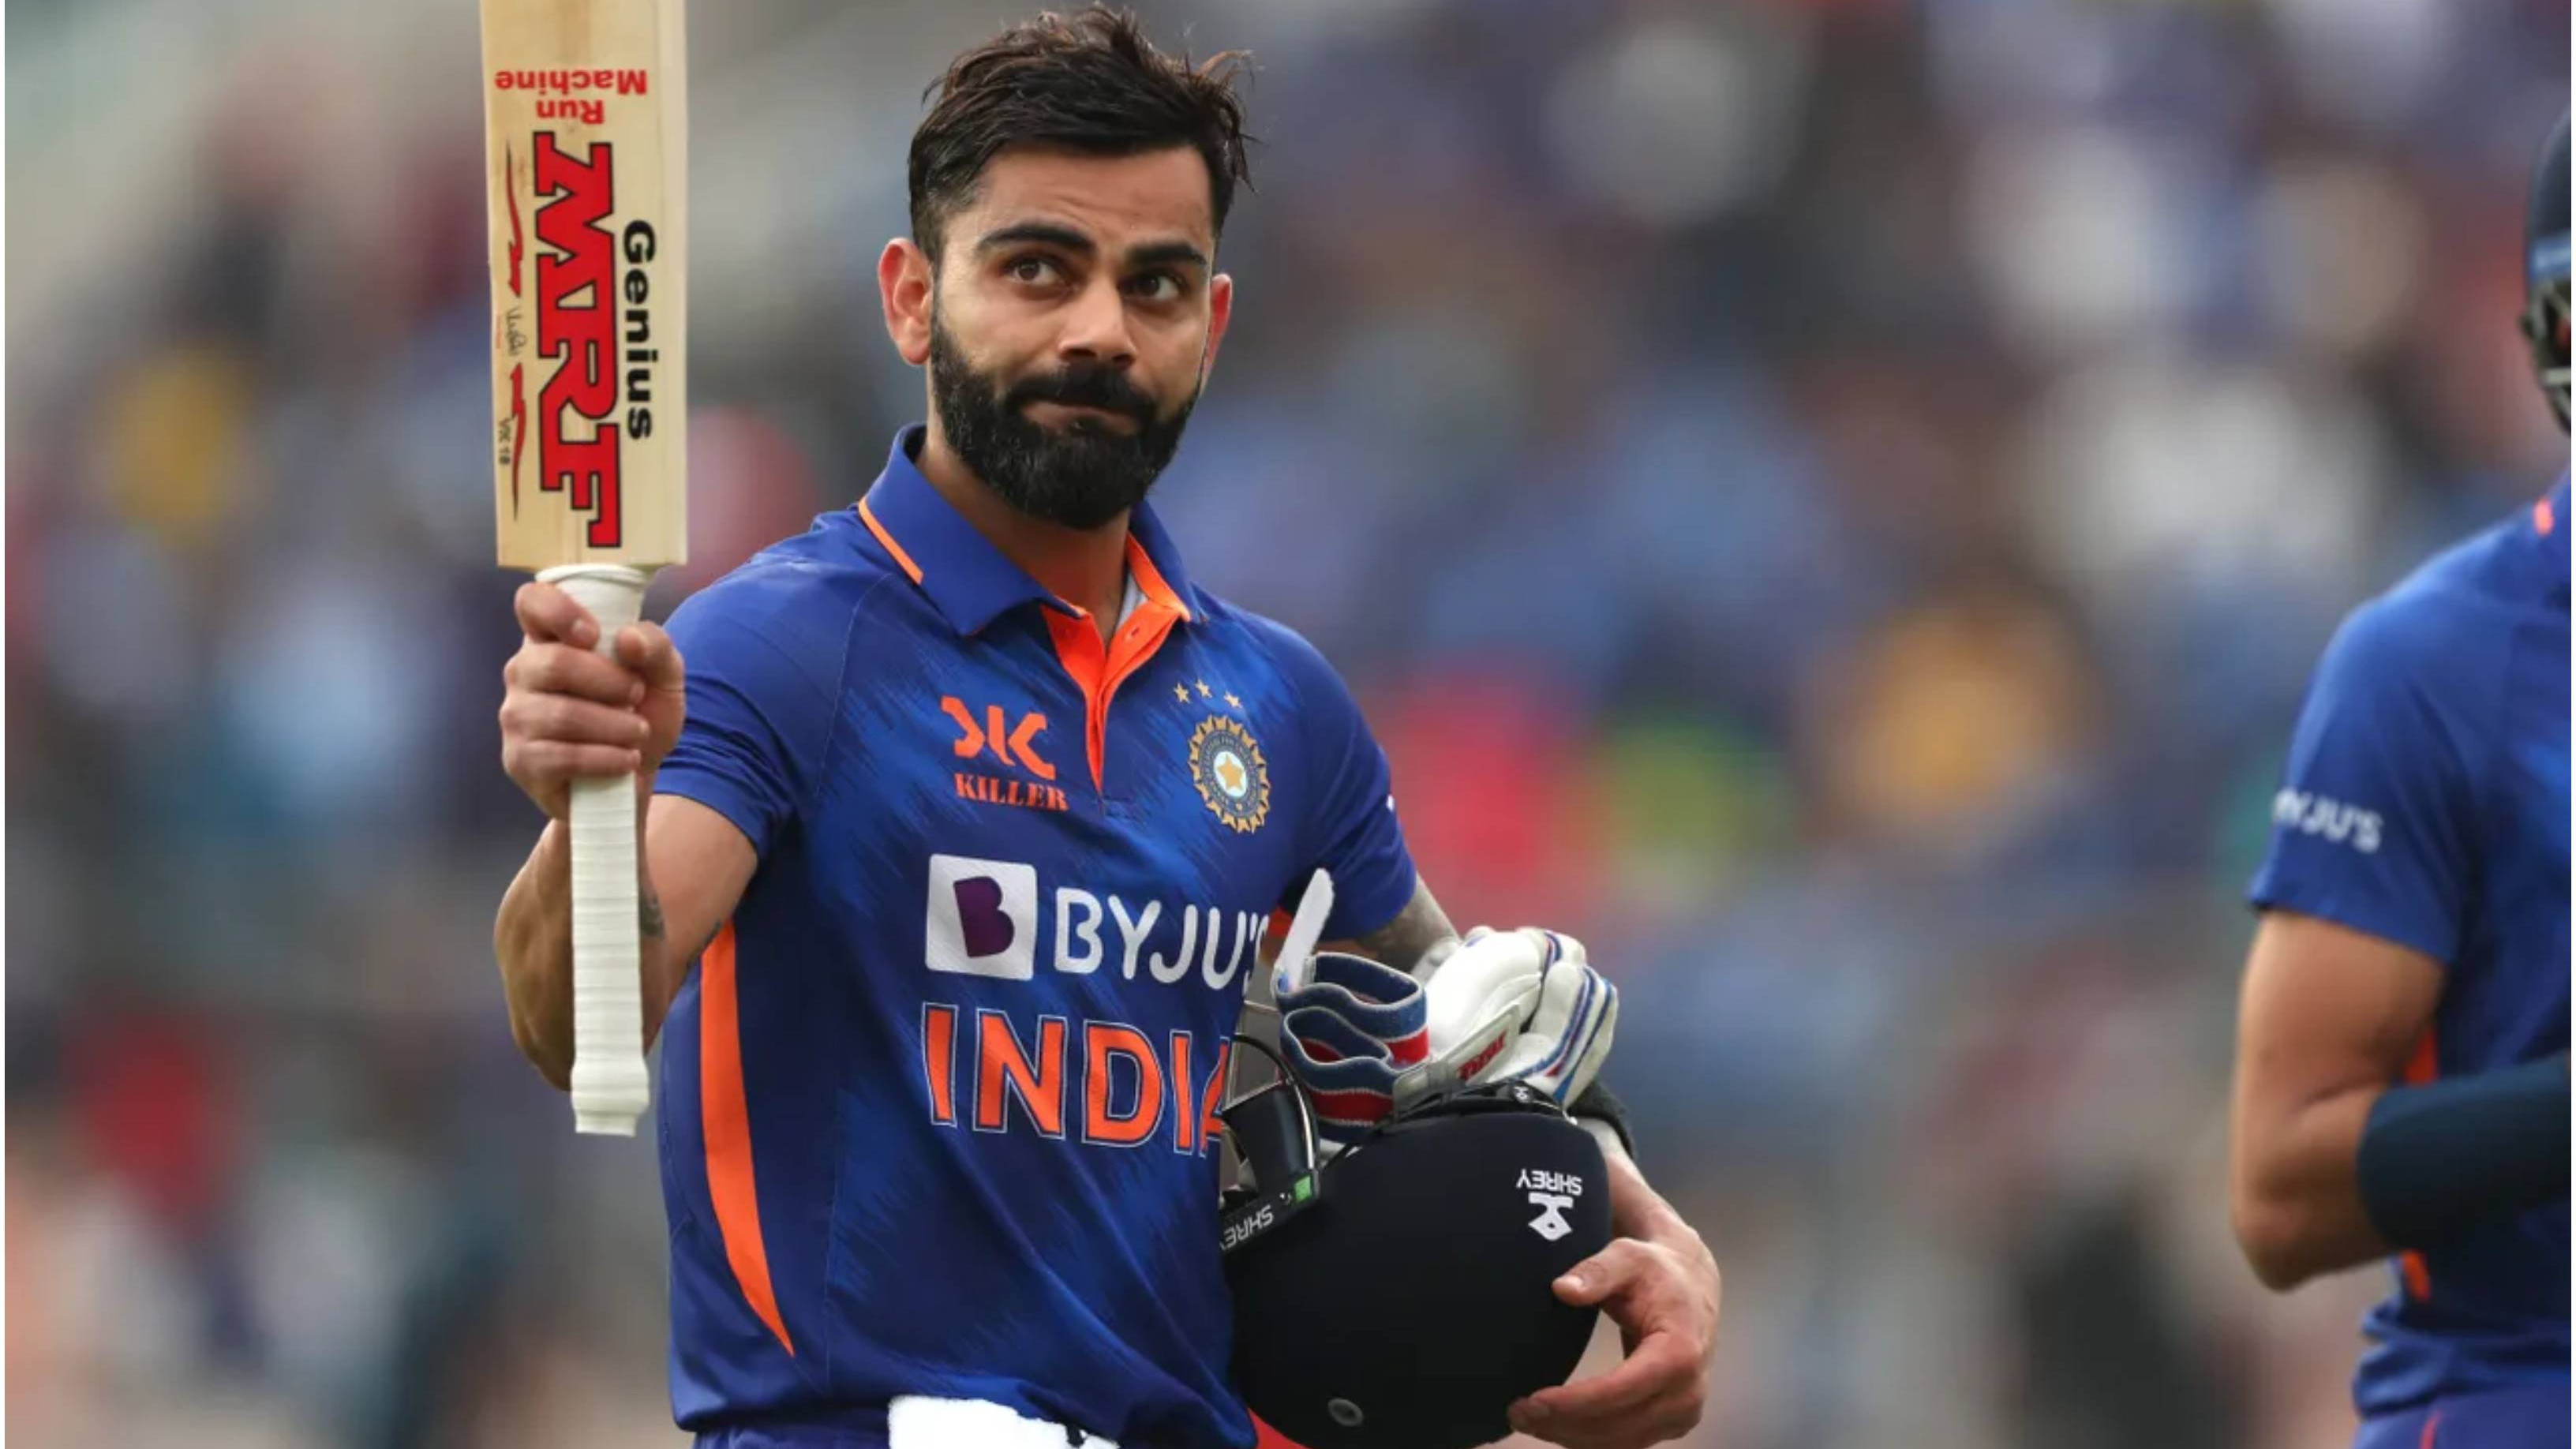 IND v SL 2023: “I am in a nice space right now and want this to continue,” Virat Kohli after his match-winning ton in 3rd ODI